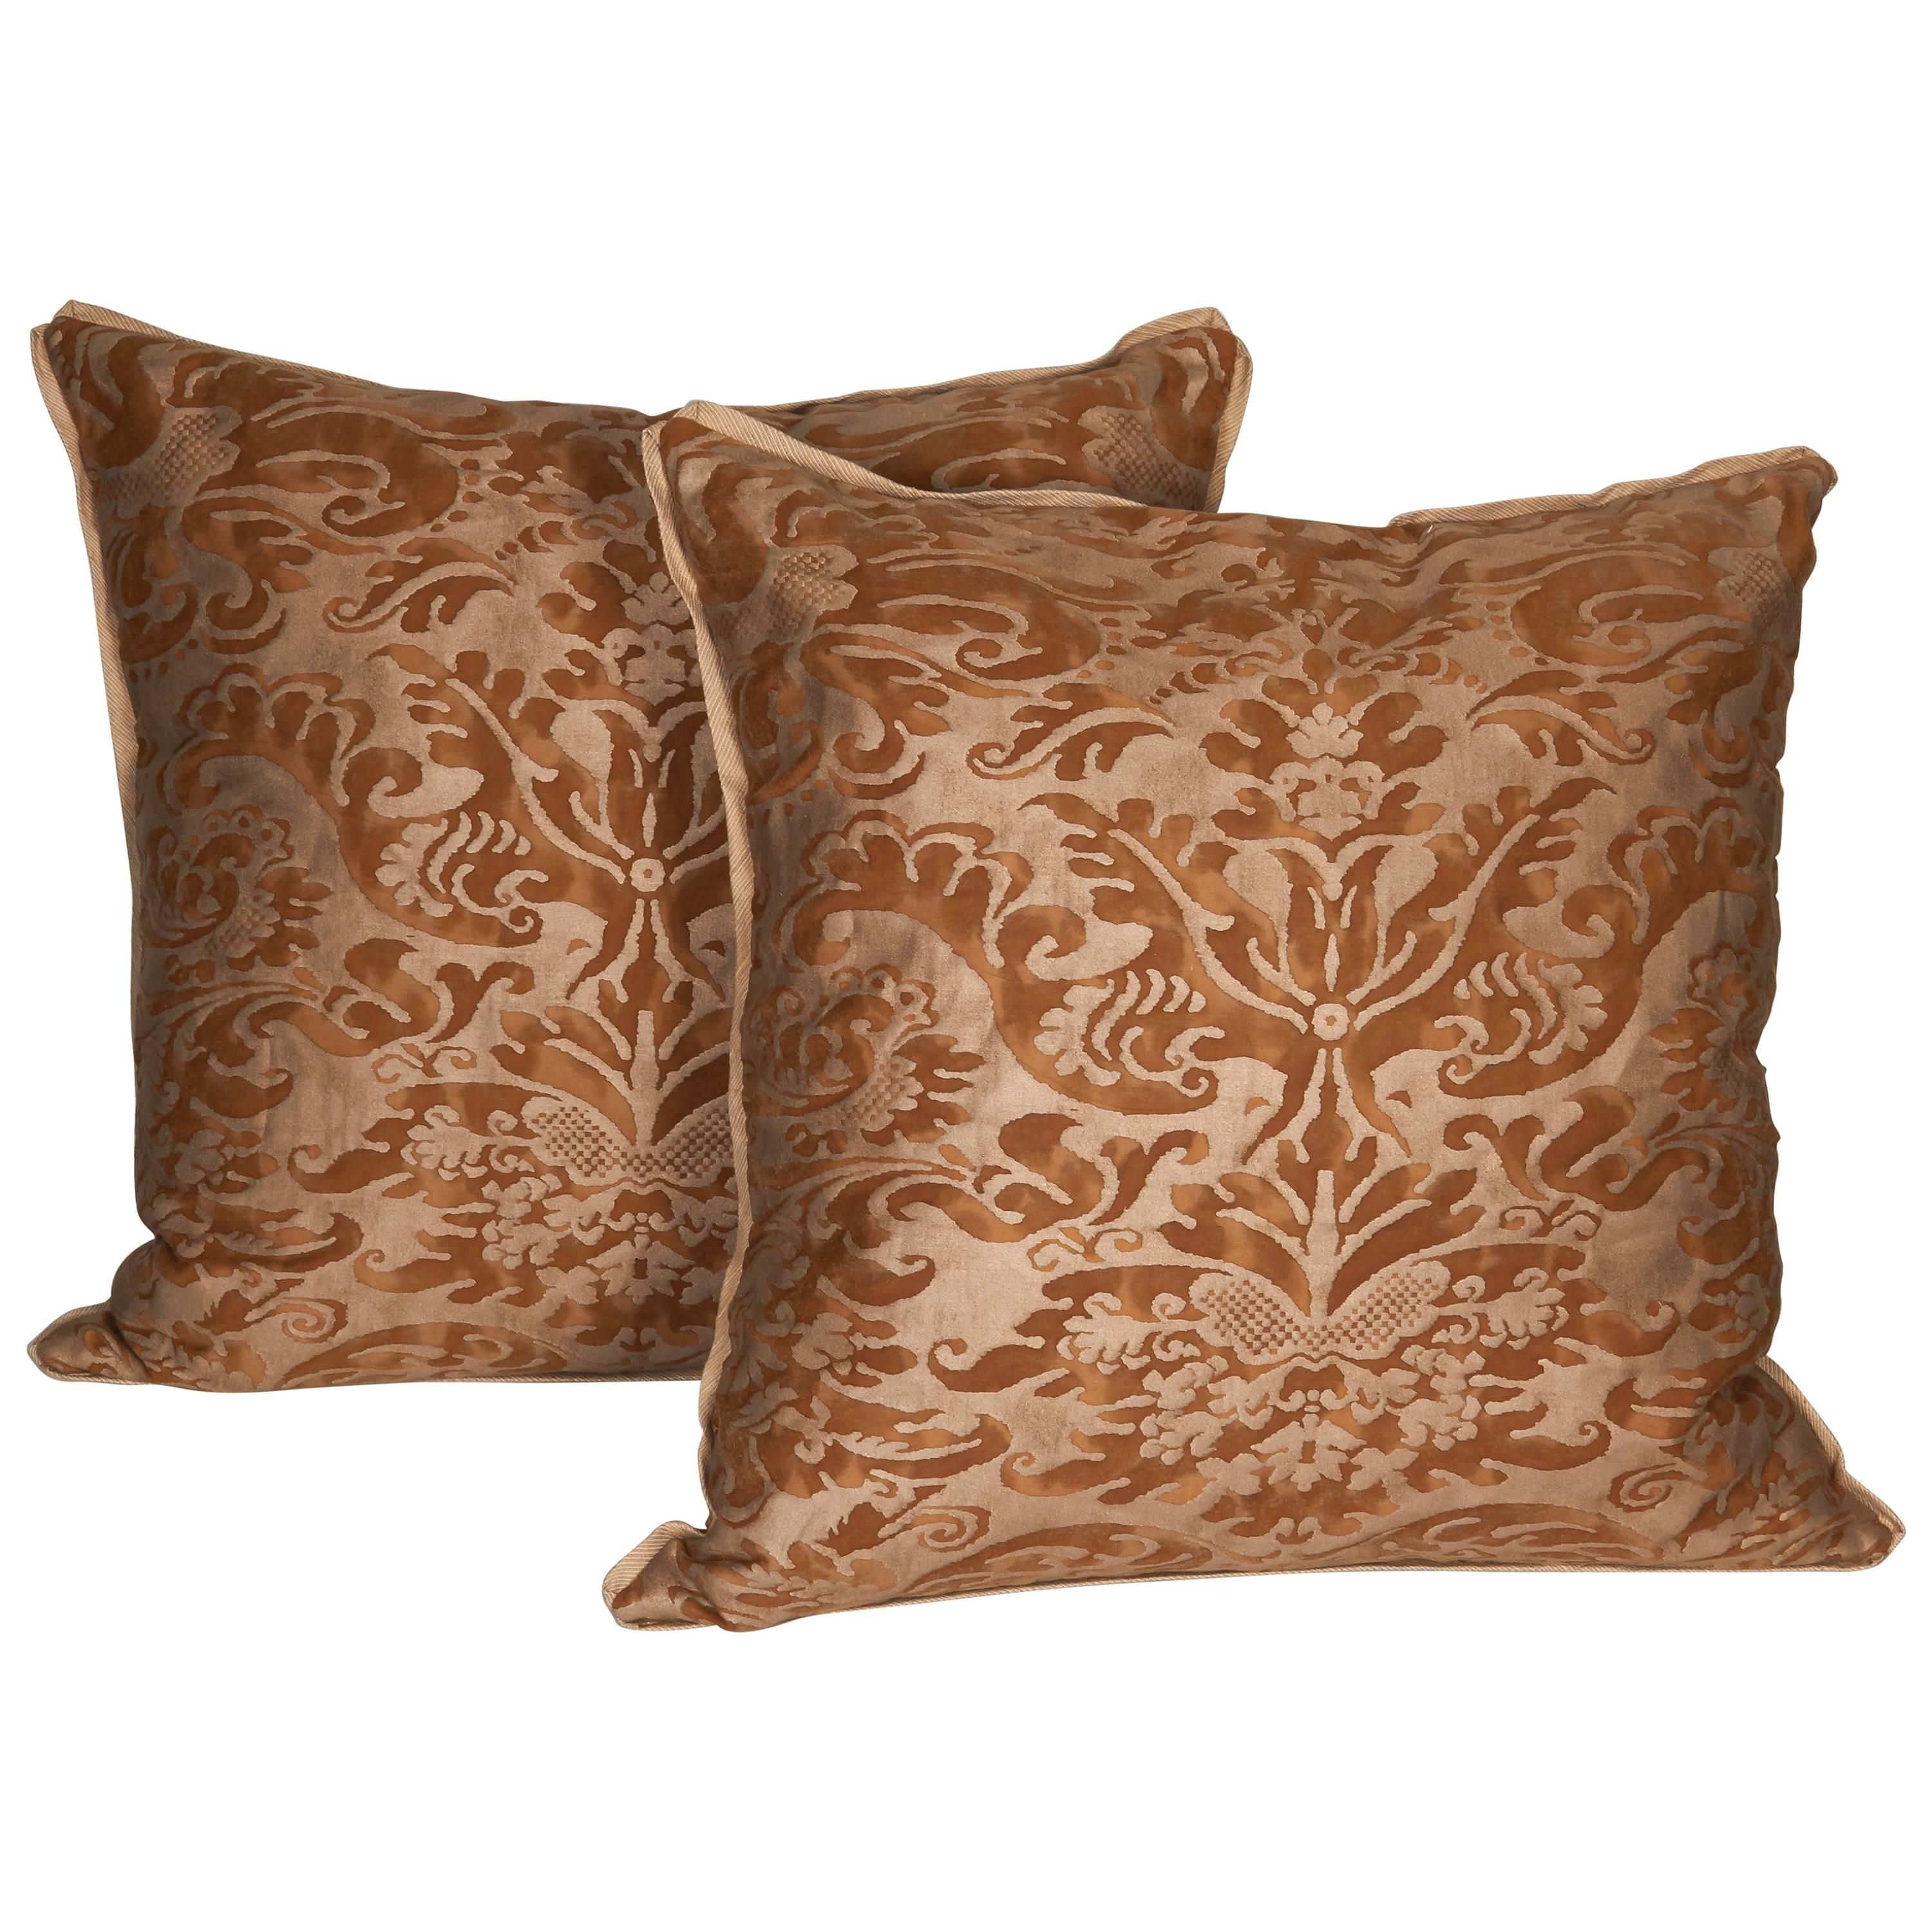 A Pair of Fortuny Fabric Cushions in the Sevigne Pattern 